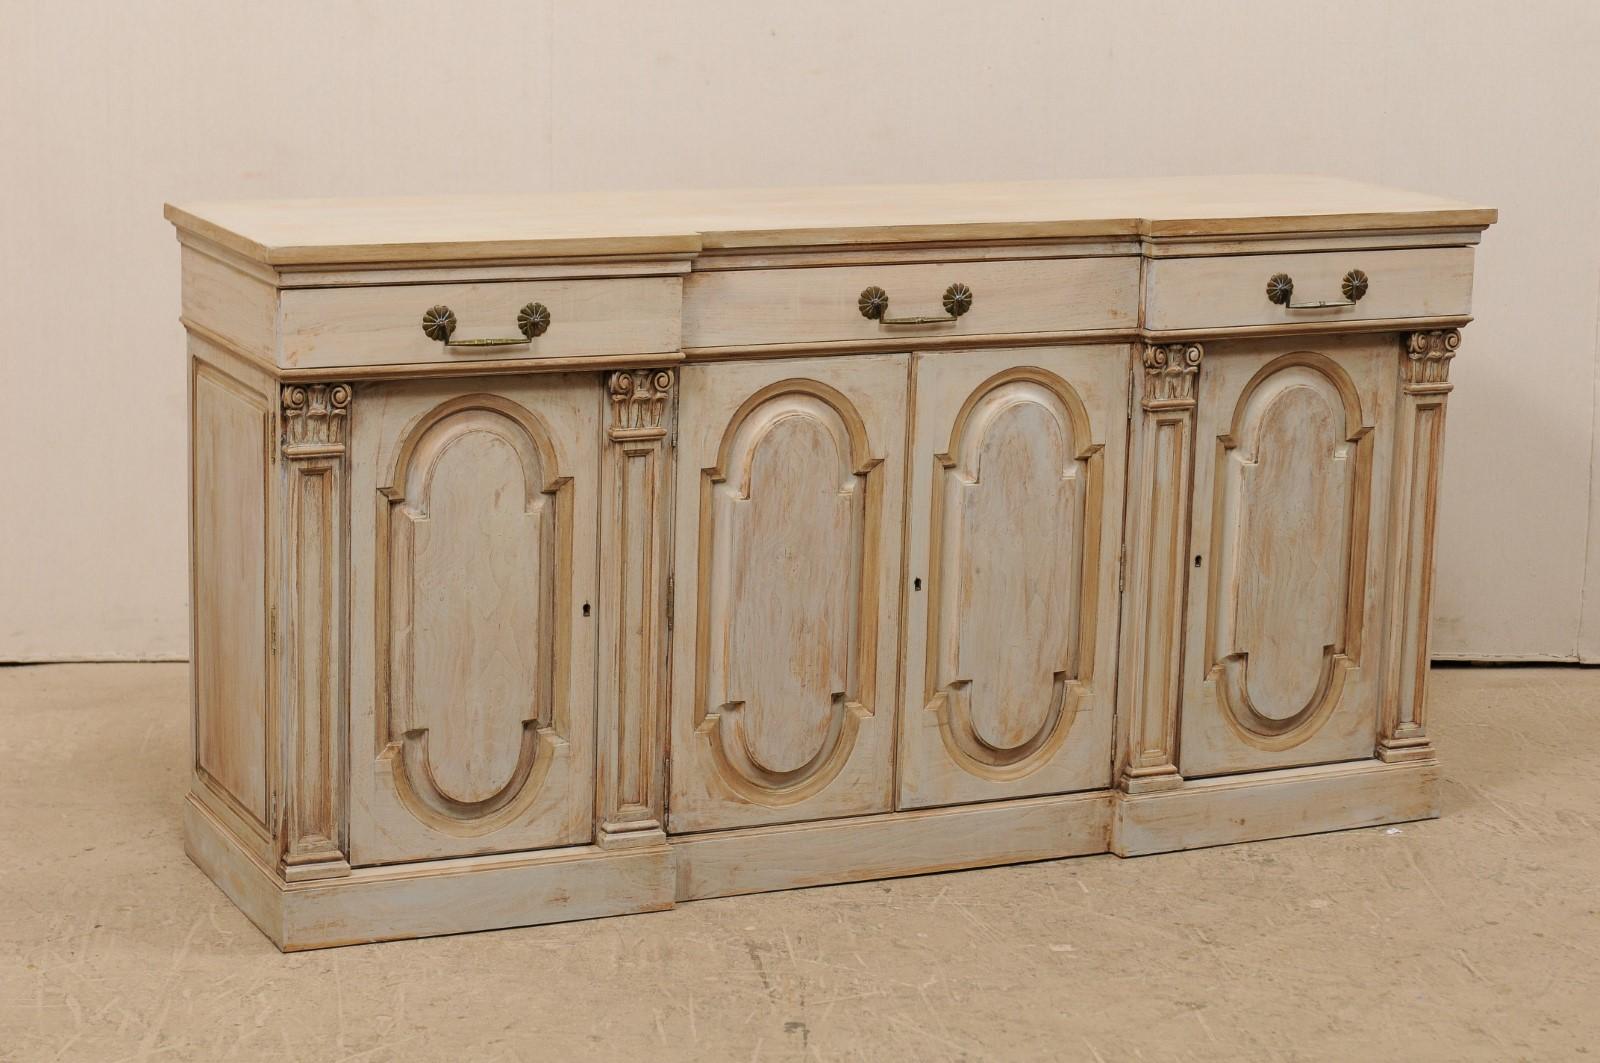 An American painted and carved wood buffet cabinet from the mid-20th century. This vintage American credenza, approximately 6 feet in length, features three drawers atop four raised paneled doors, with arched tops and bottoms, of which are flanked